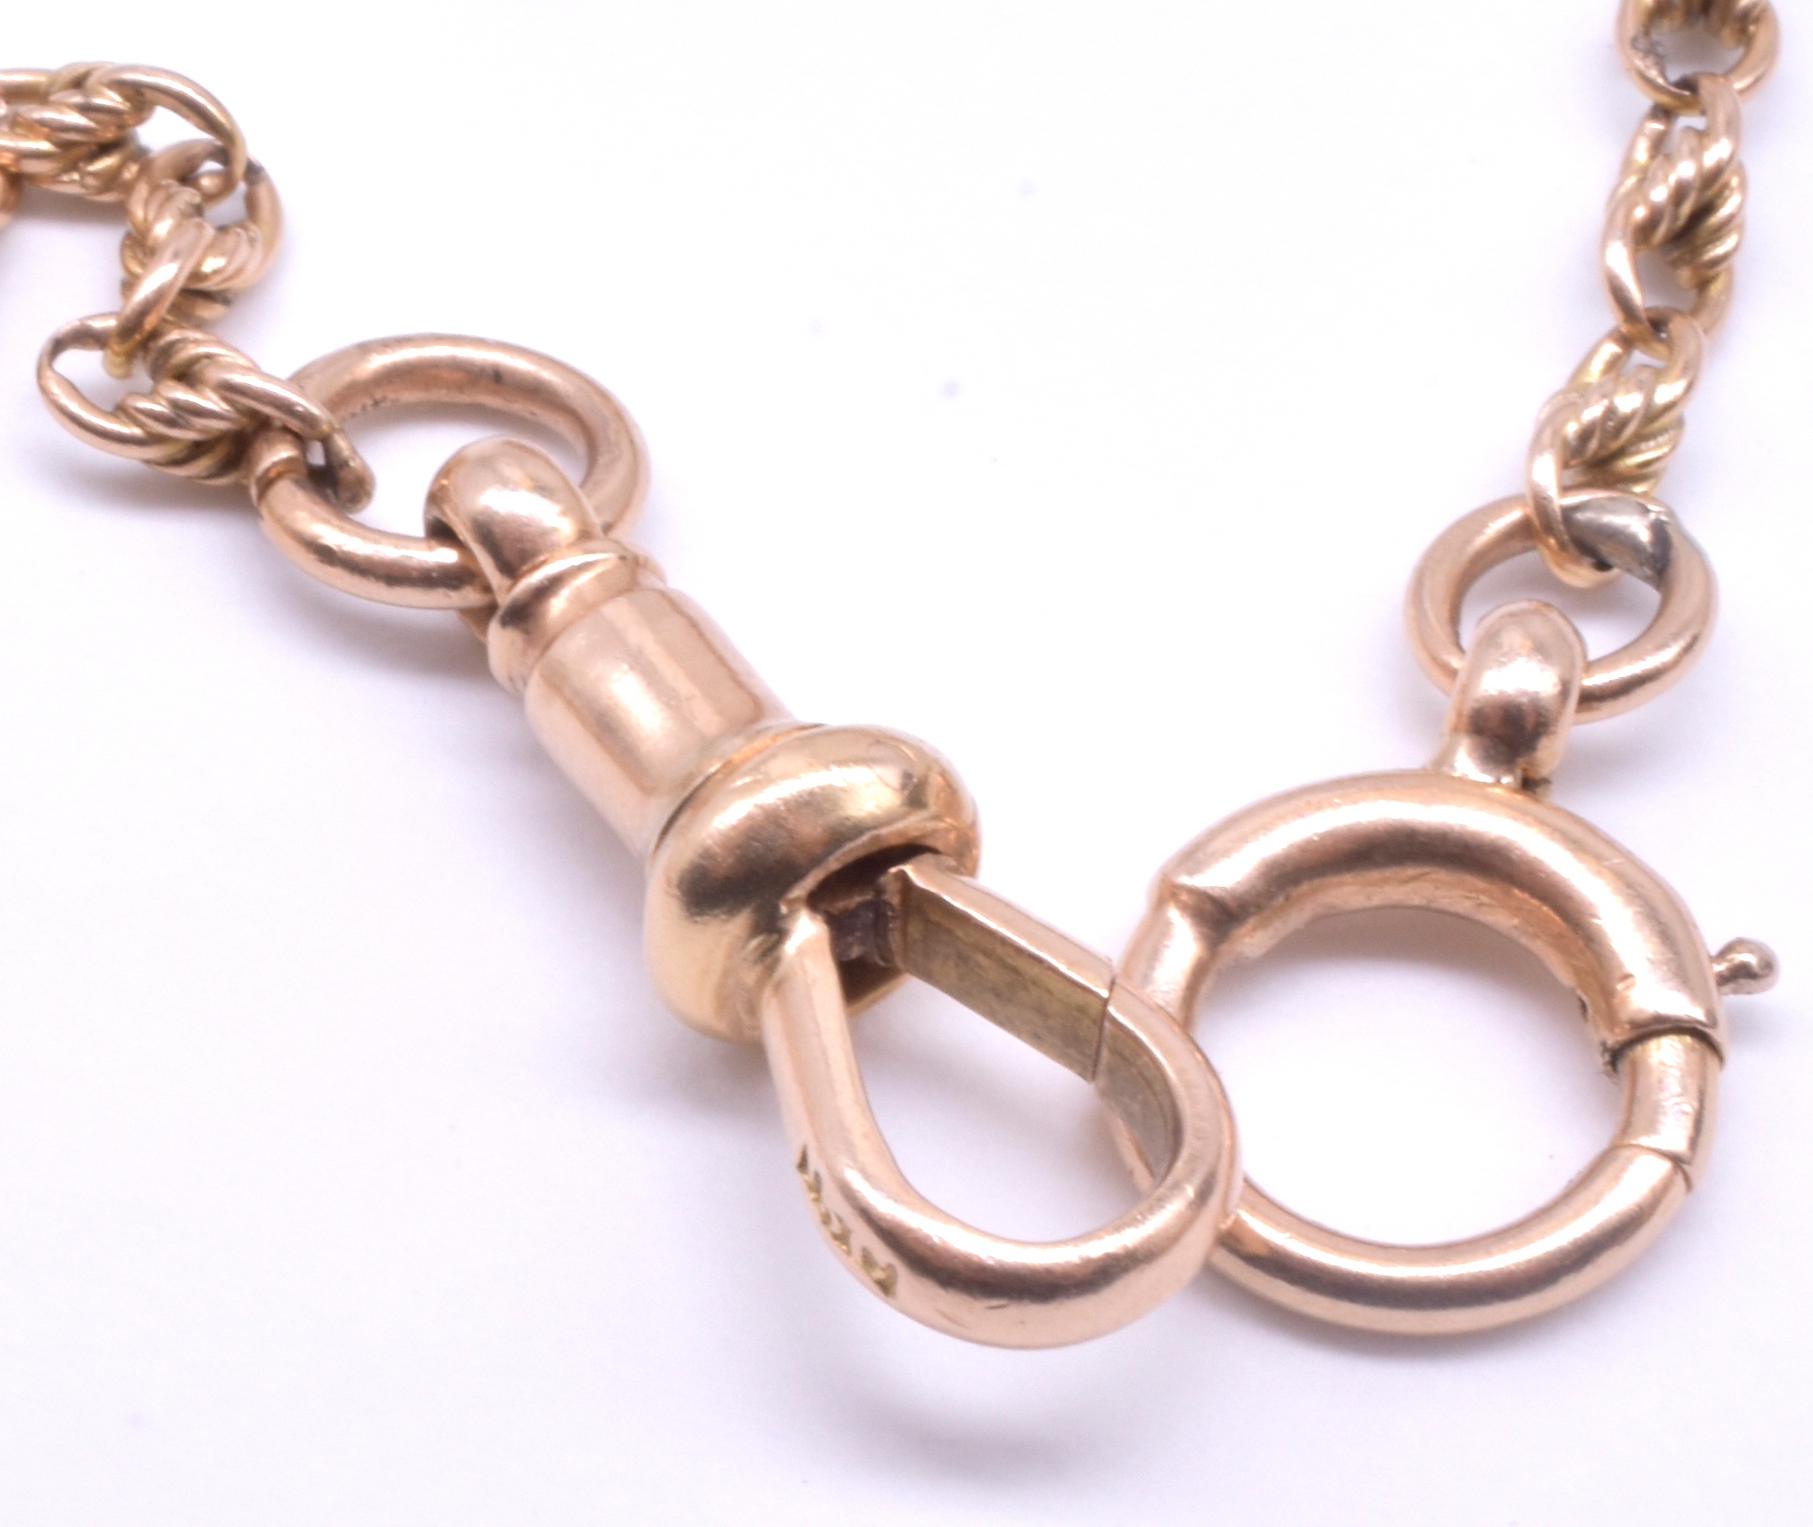 Antique 15 Karat Double Fetter and Love knot Link Watch Chain, 51” In Excellent Condition For Sale In Baltimore, MD